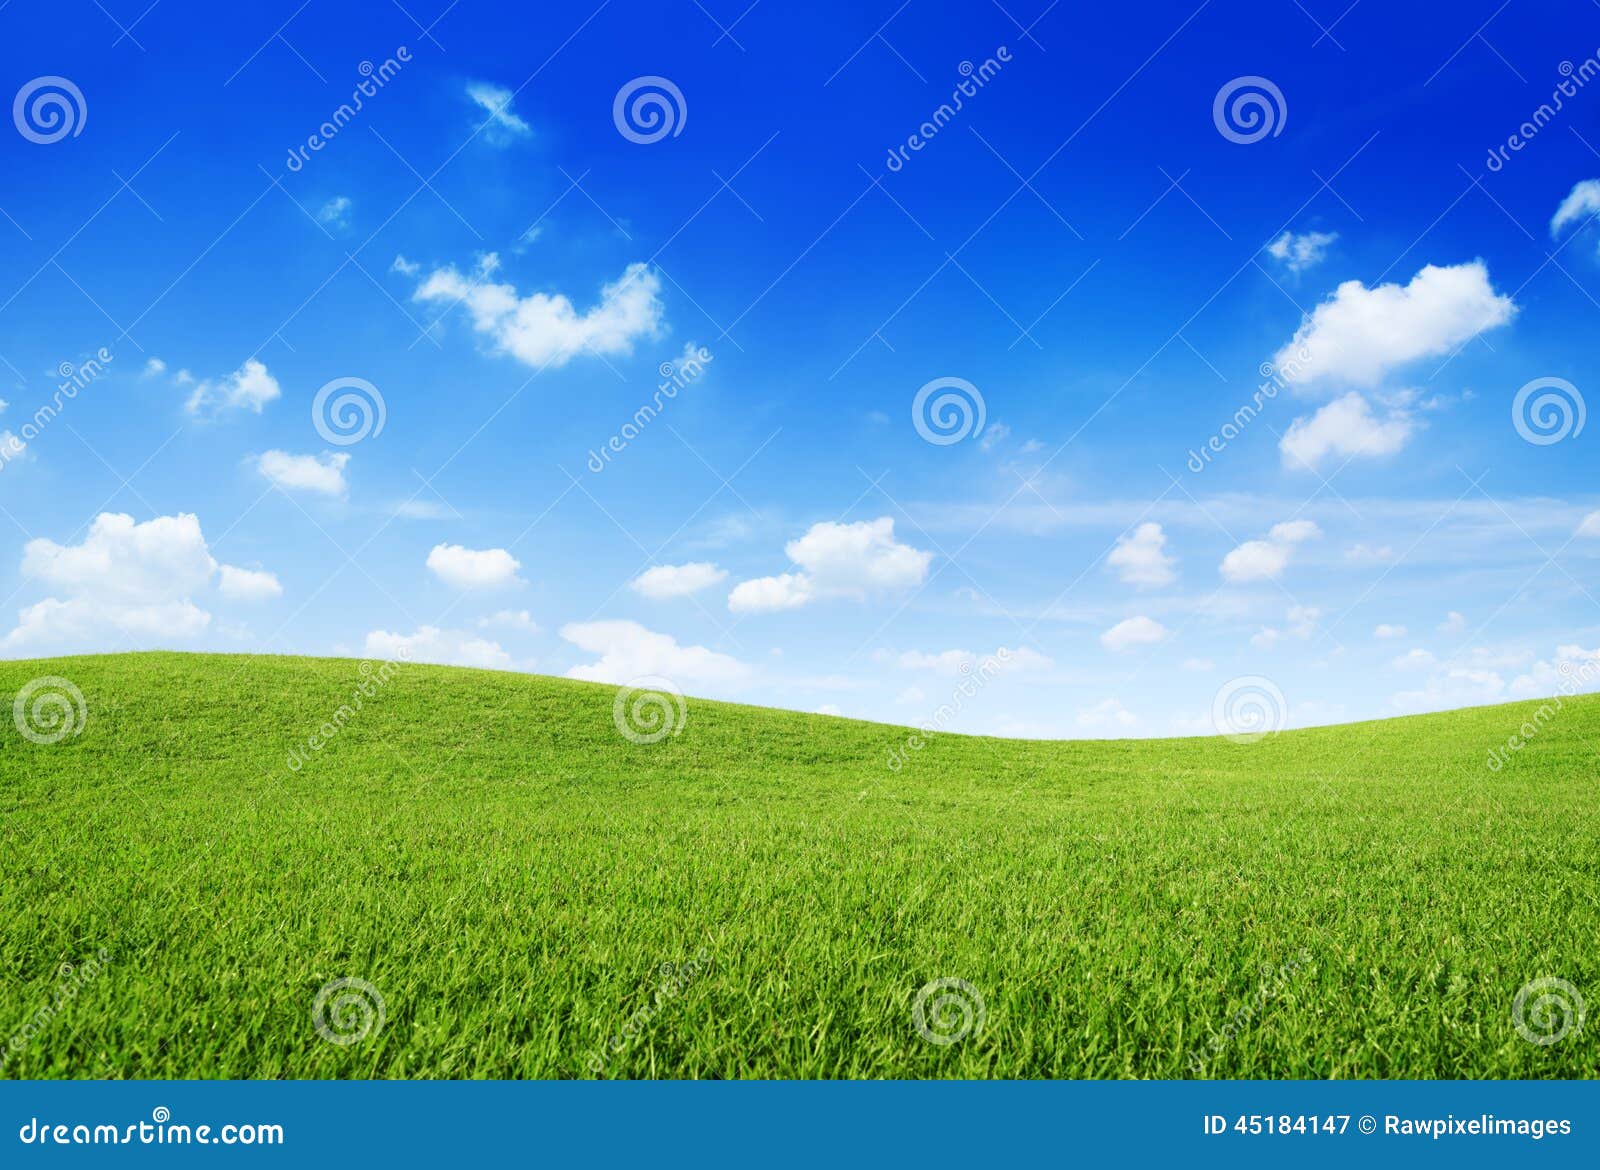 green grass hill and clear blue sky